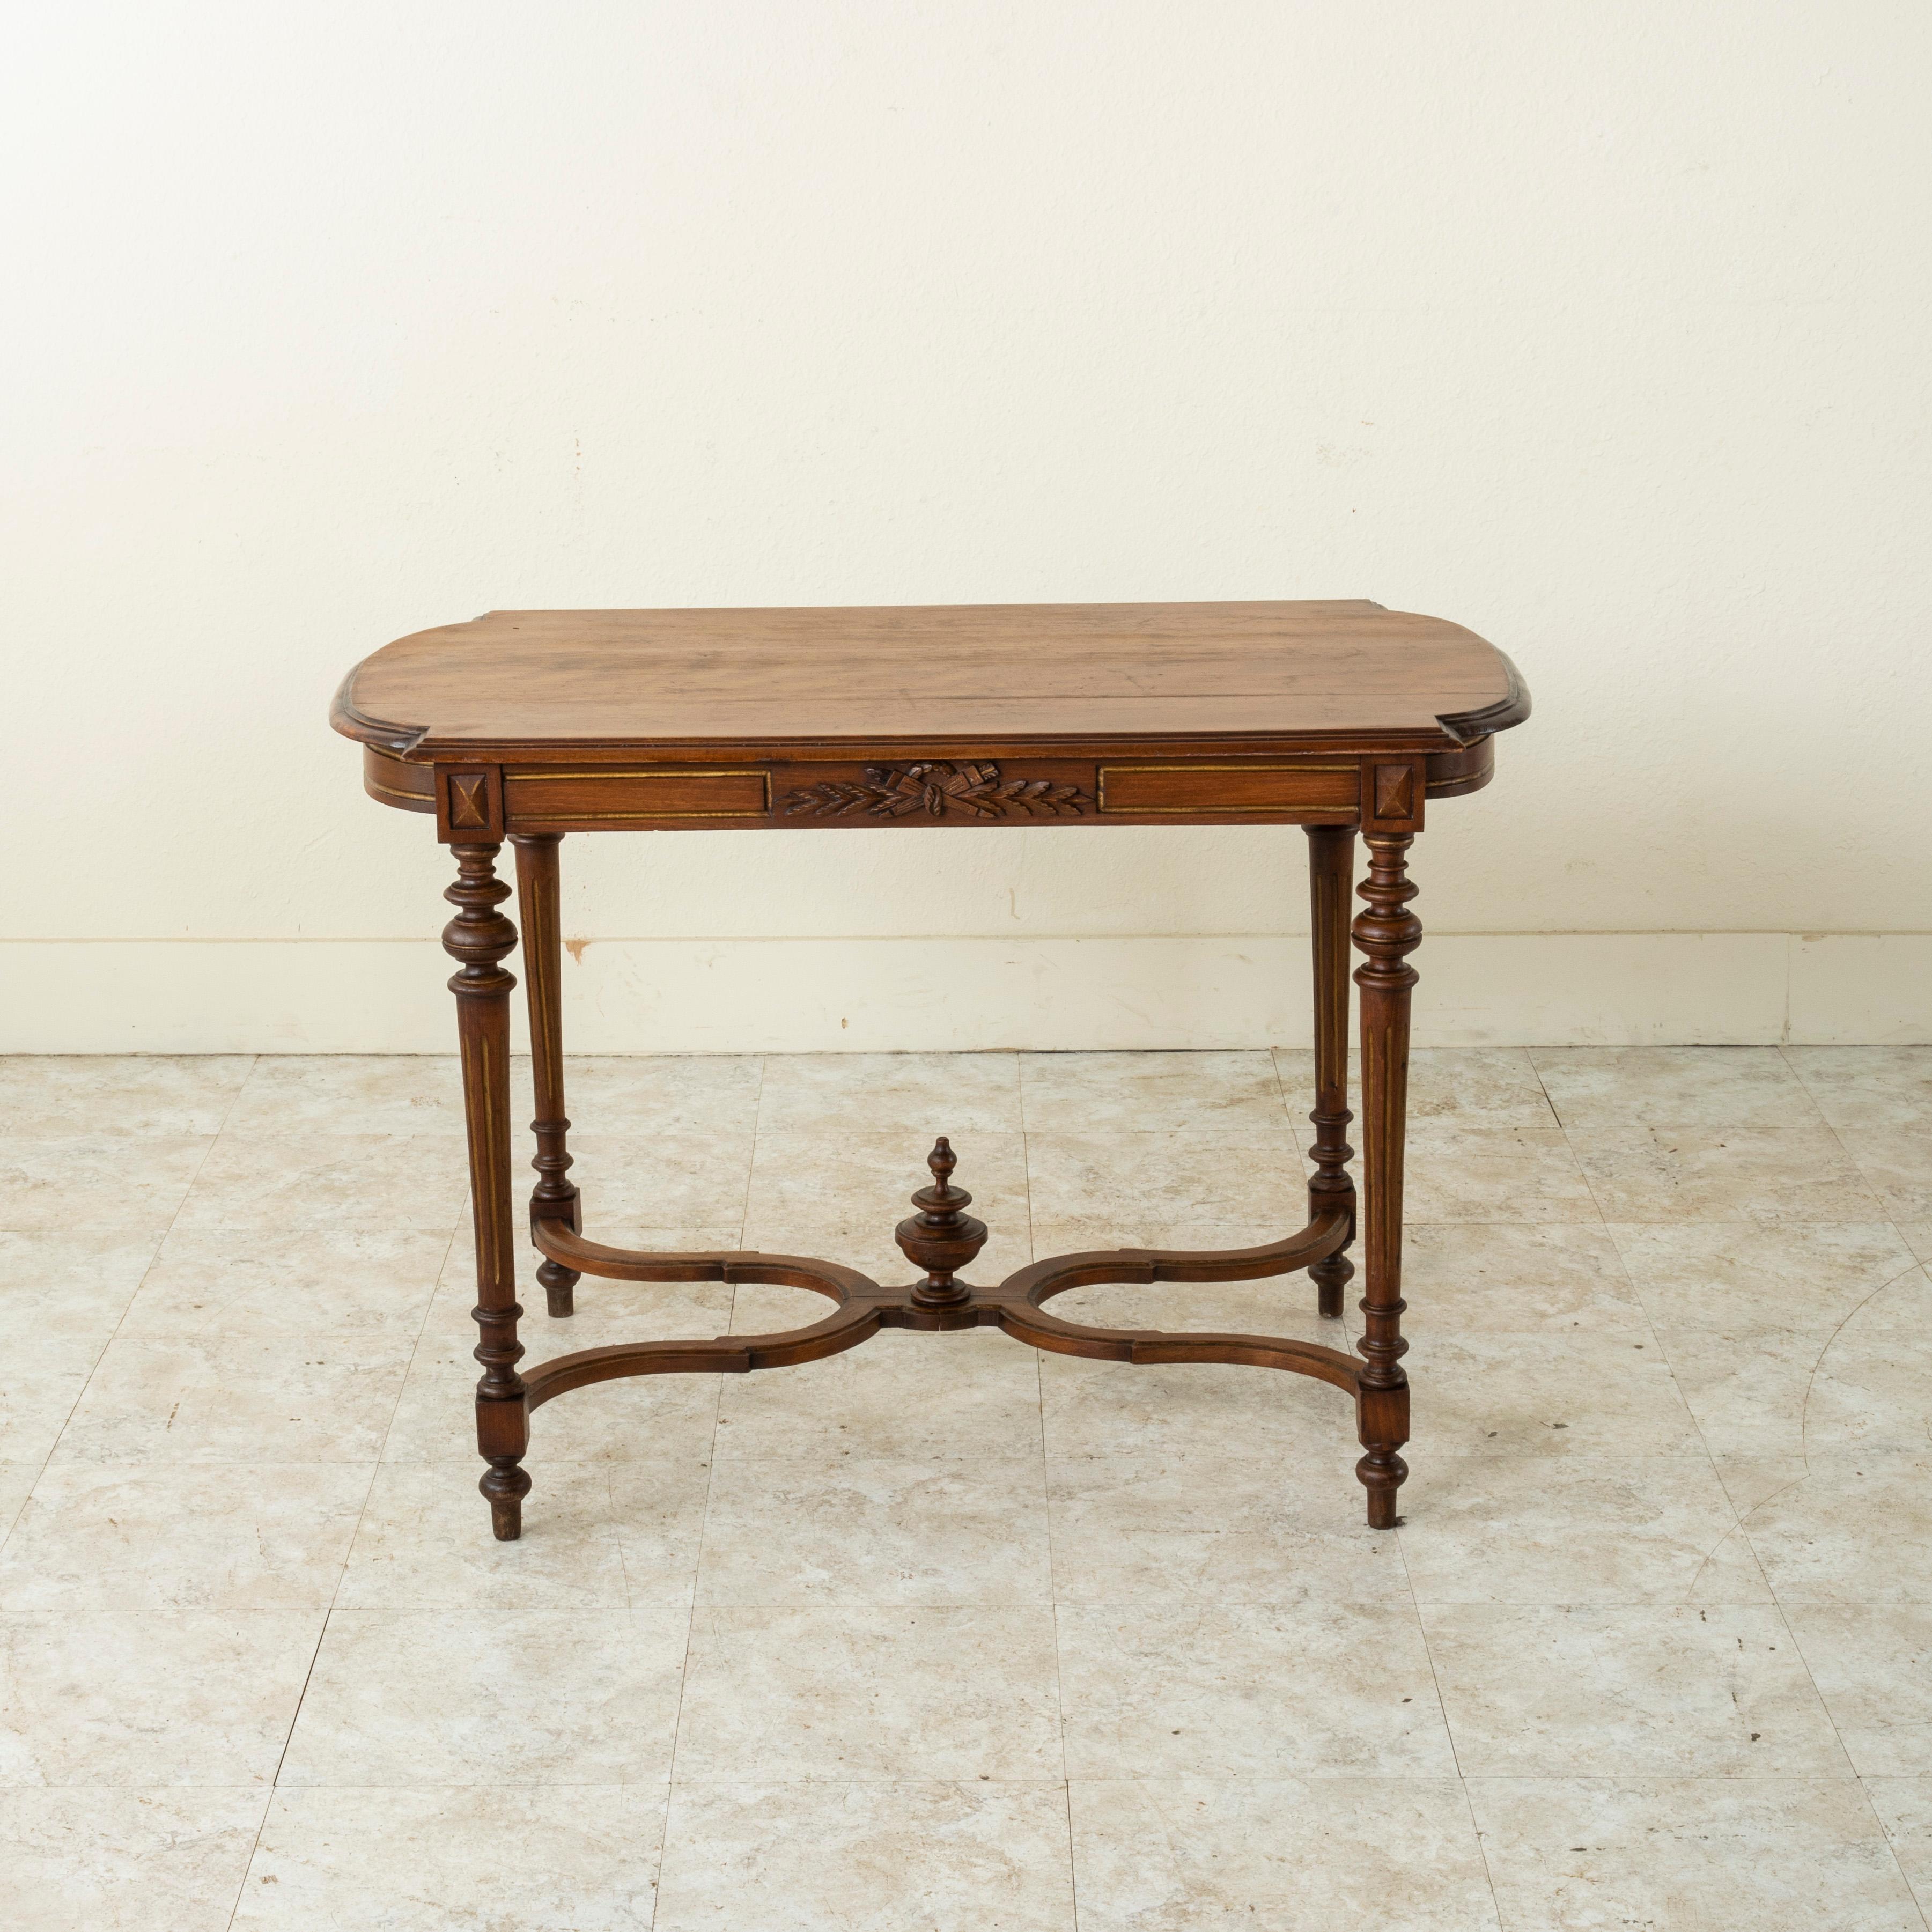 This Louis XVI style walnut writing table from the late 19th century features a hand carved element of a classic crossed torch and quiver with a crown of laurels. Its beveled top rests above an apron detailed with gilded inset lines. Tapered fluted